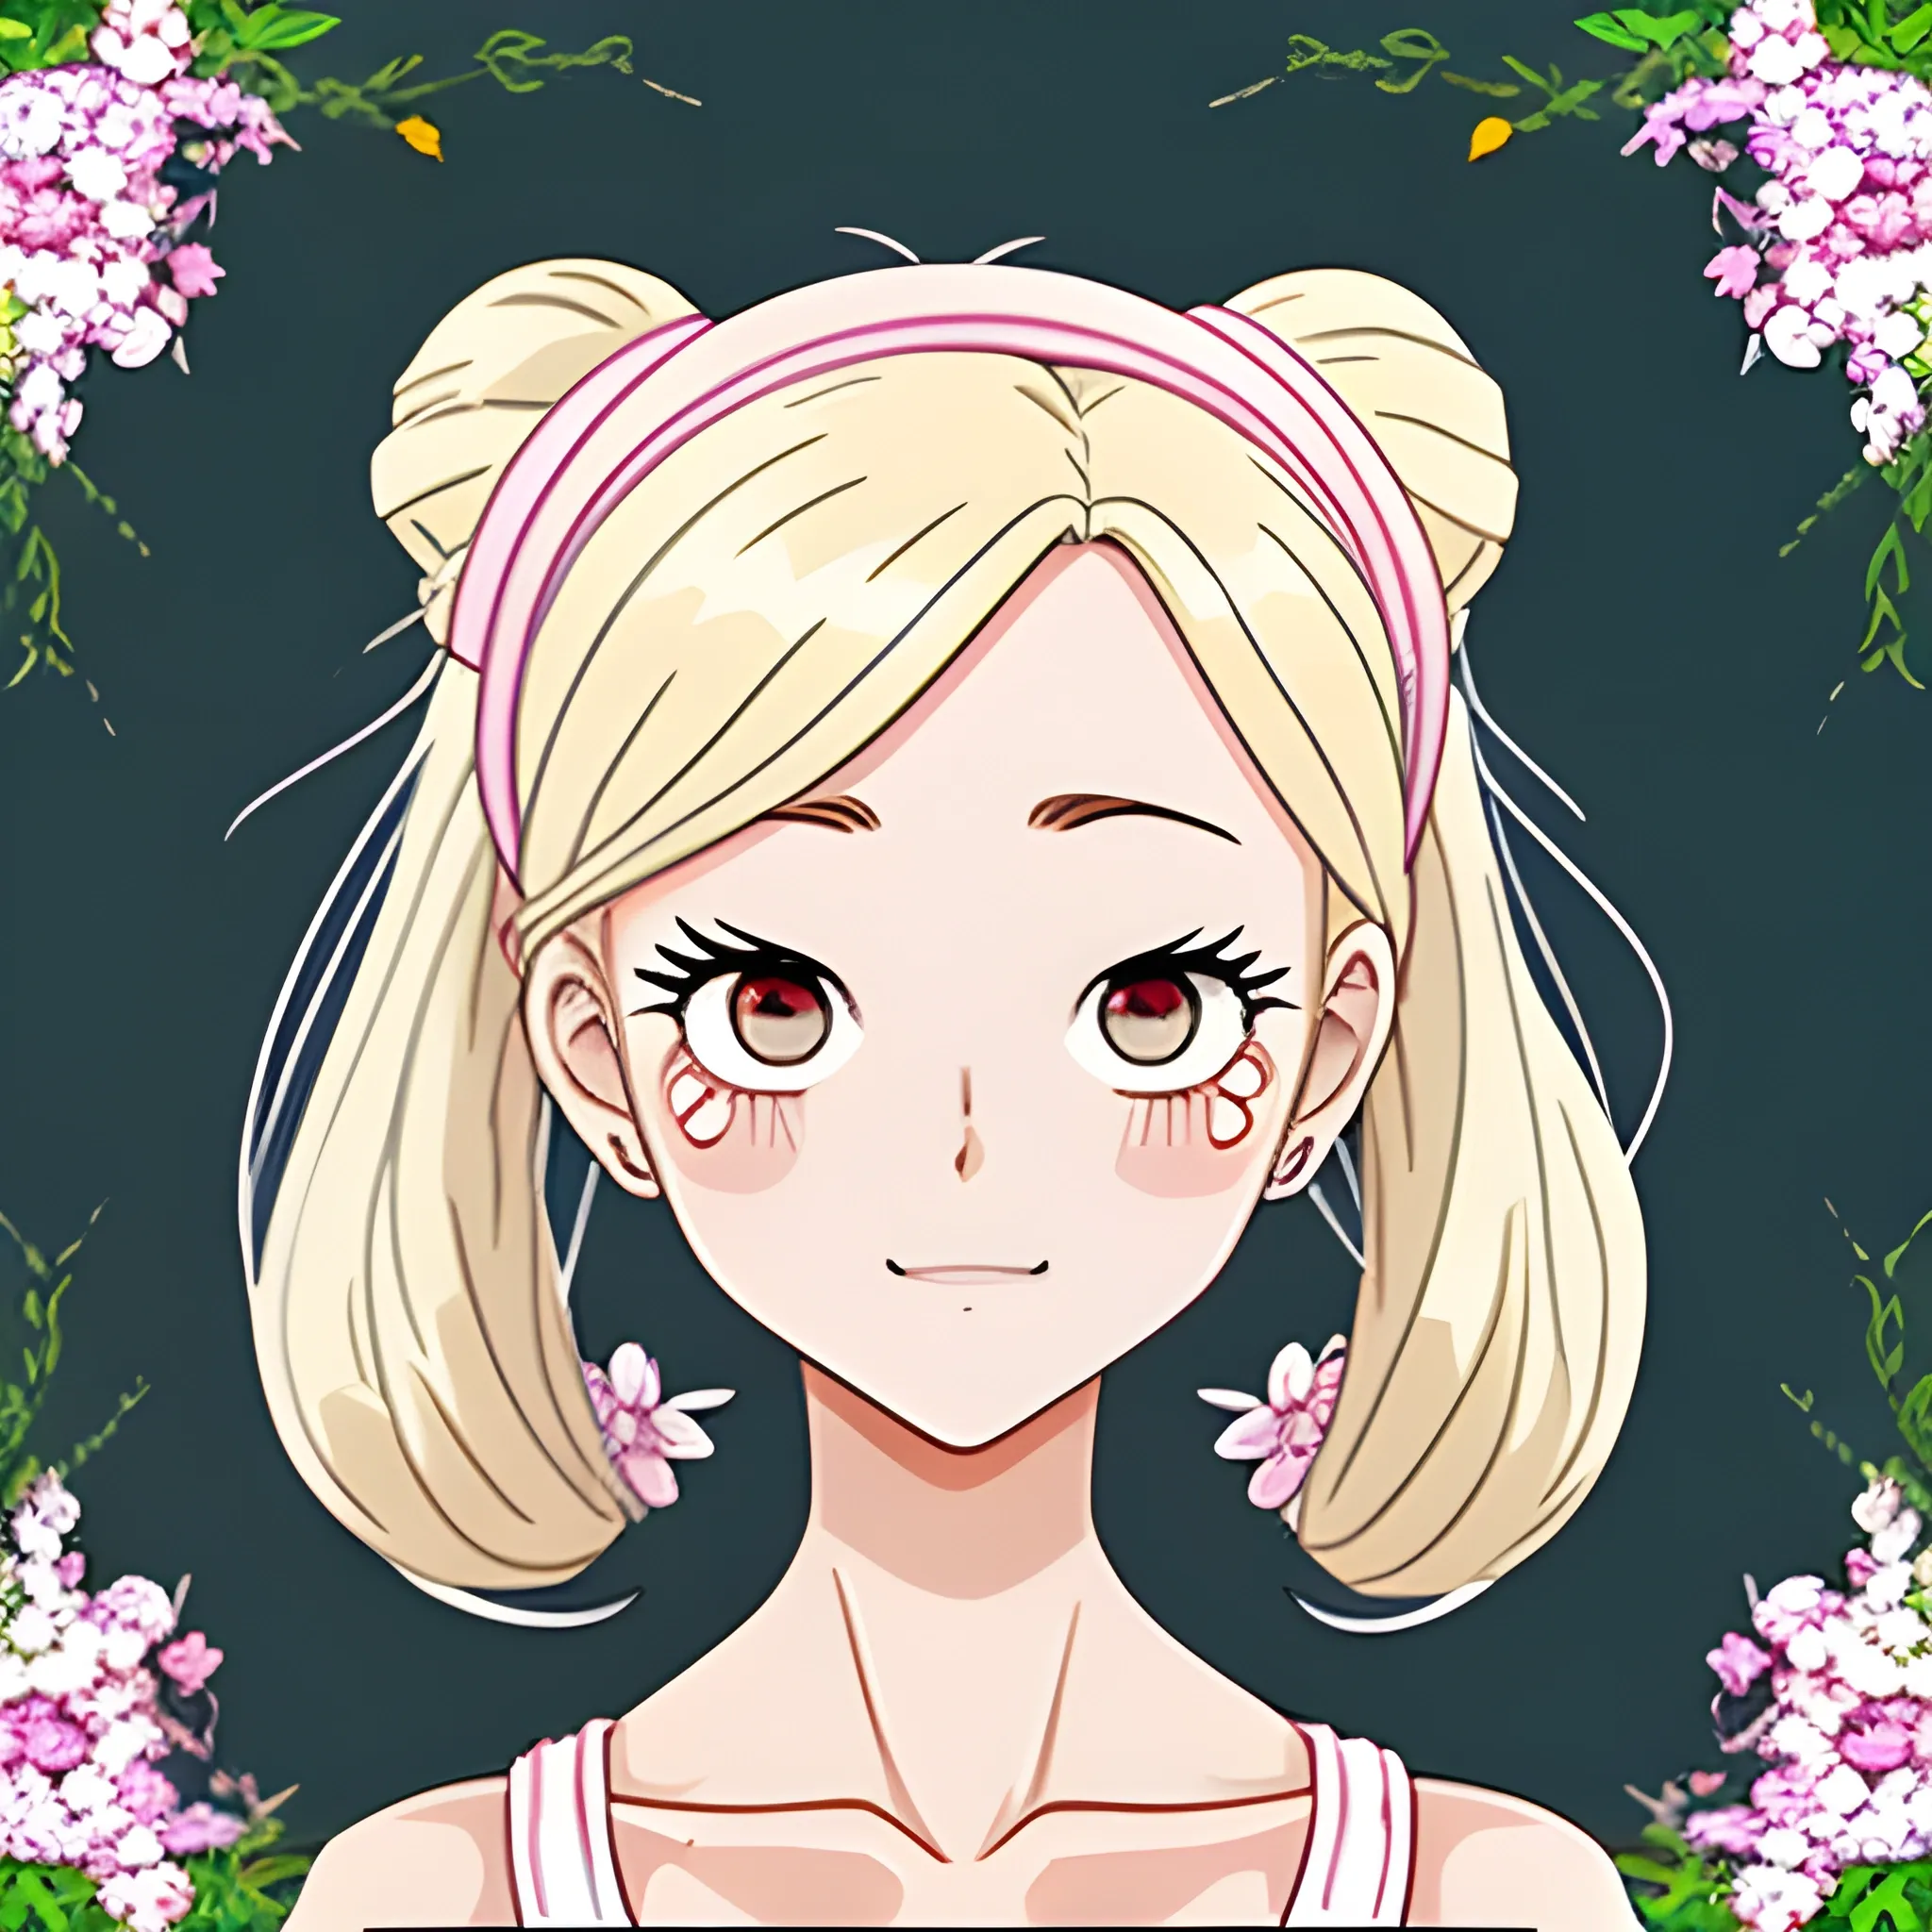 studio ghibli, where's waldo style,Gelda,8-10 years old,girl,blonde hair,twin ponytails,round face,fair skin,sparkling eyes,small cute nose,short stature,slim,agile,pink and white dress,white flowers,pink ribbons,white princess shoes,bow knot,little accessories,pink gem hair clip,white lace handkerchief,sweet,vibrant,young girl,brave,kind-hearted,fairytale princess,warm,dreamy,beautiful detailed eyes,beautiful detailed lips,extremely detailed eyes and face,longeyelashes, Cartoon, Cartoon,happy face